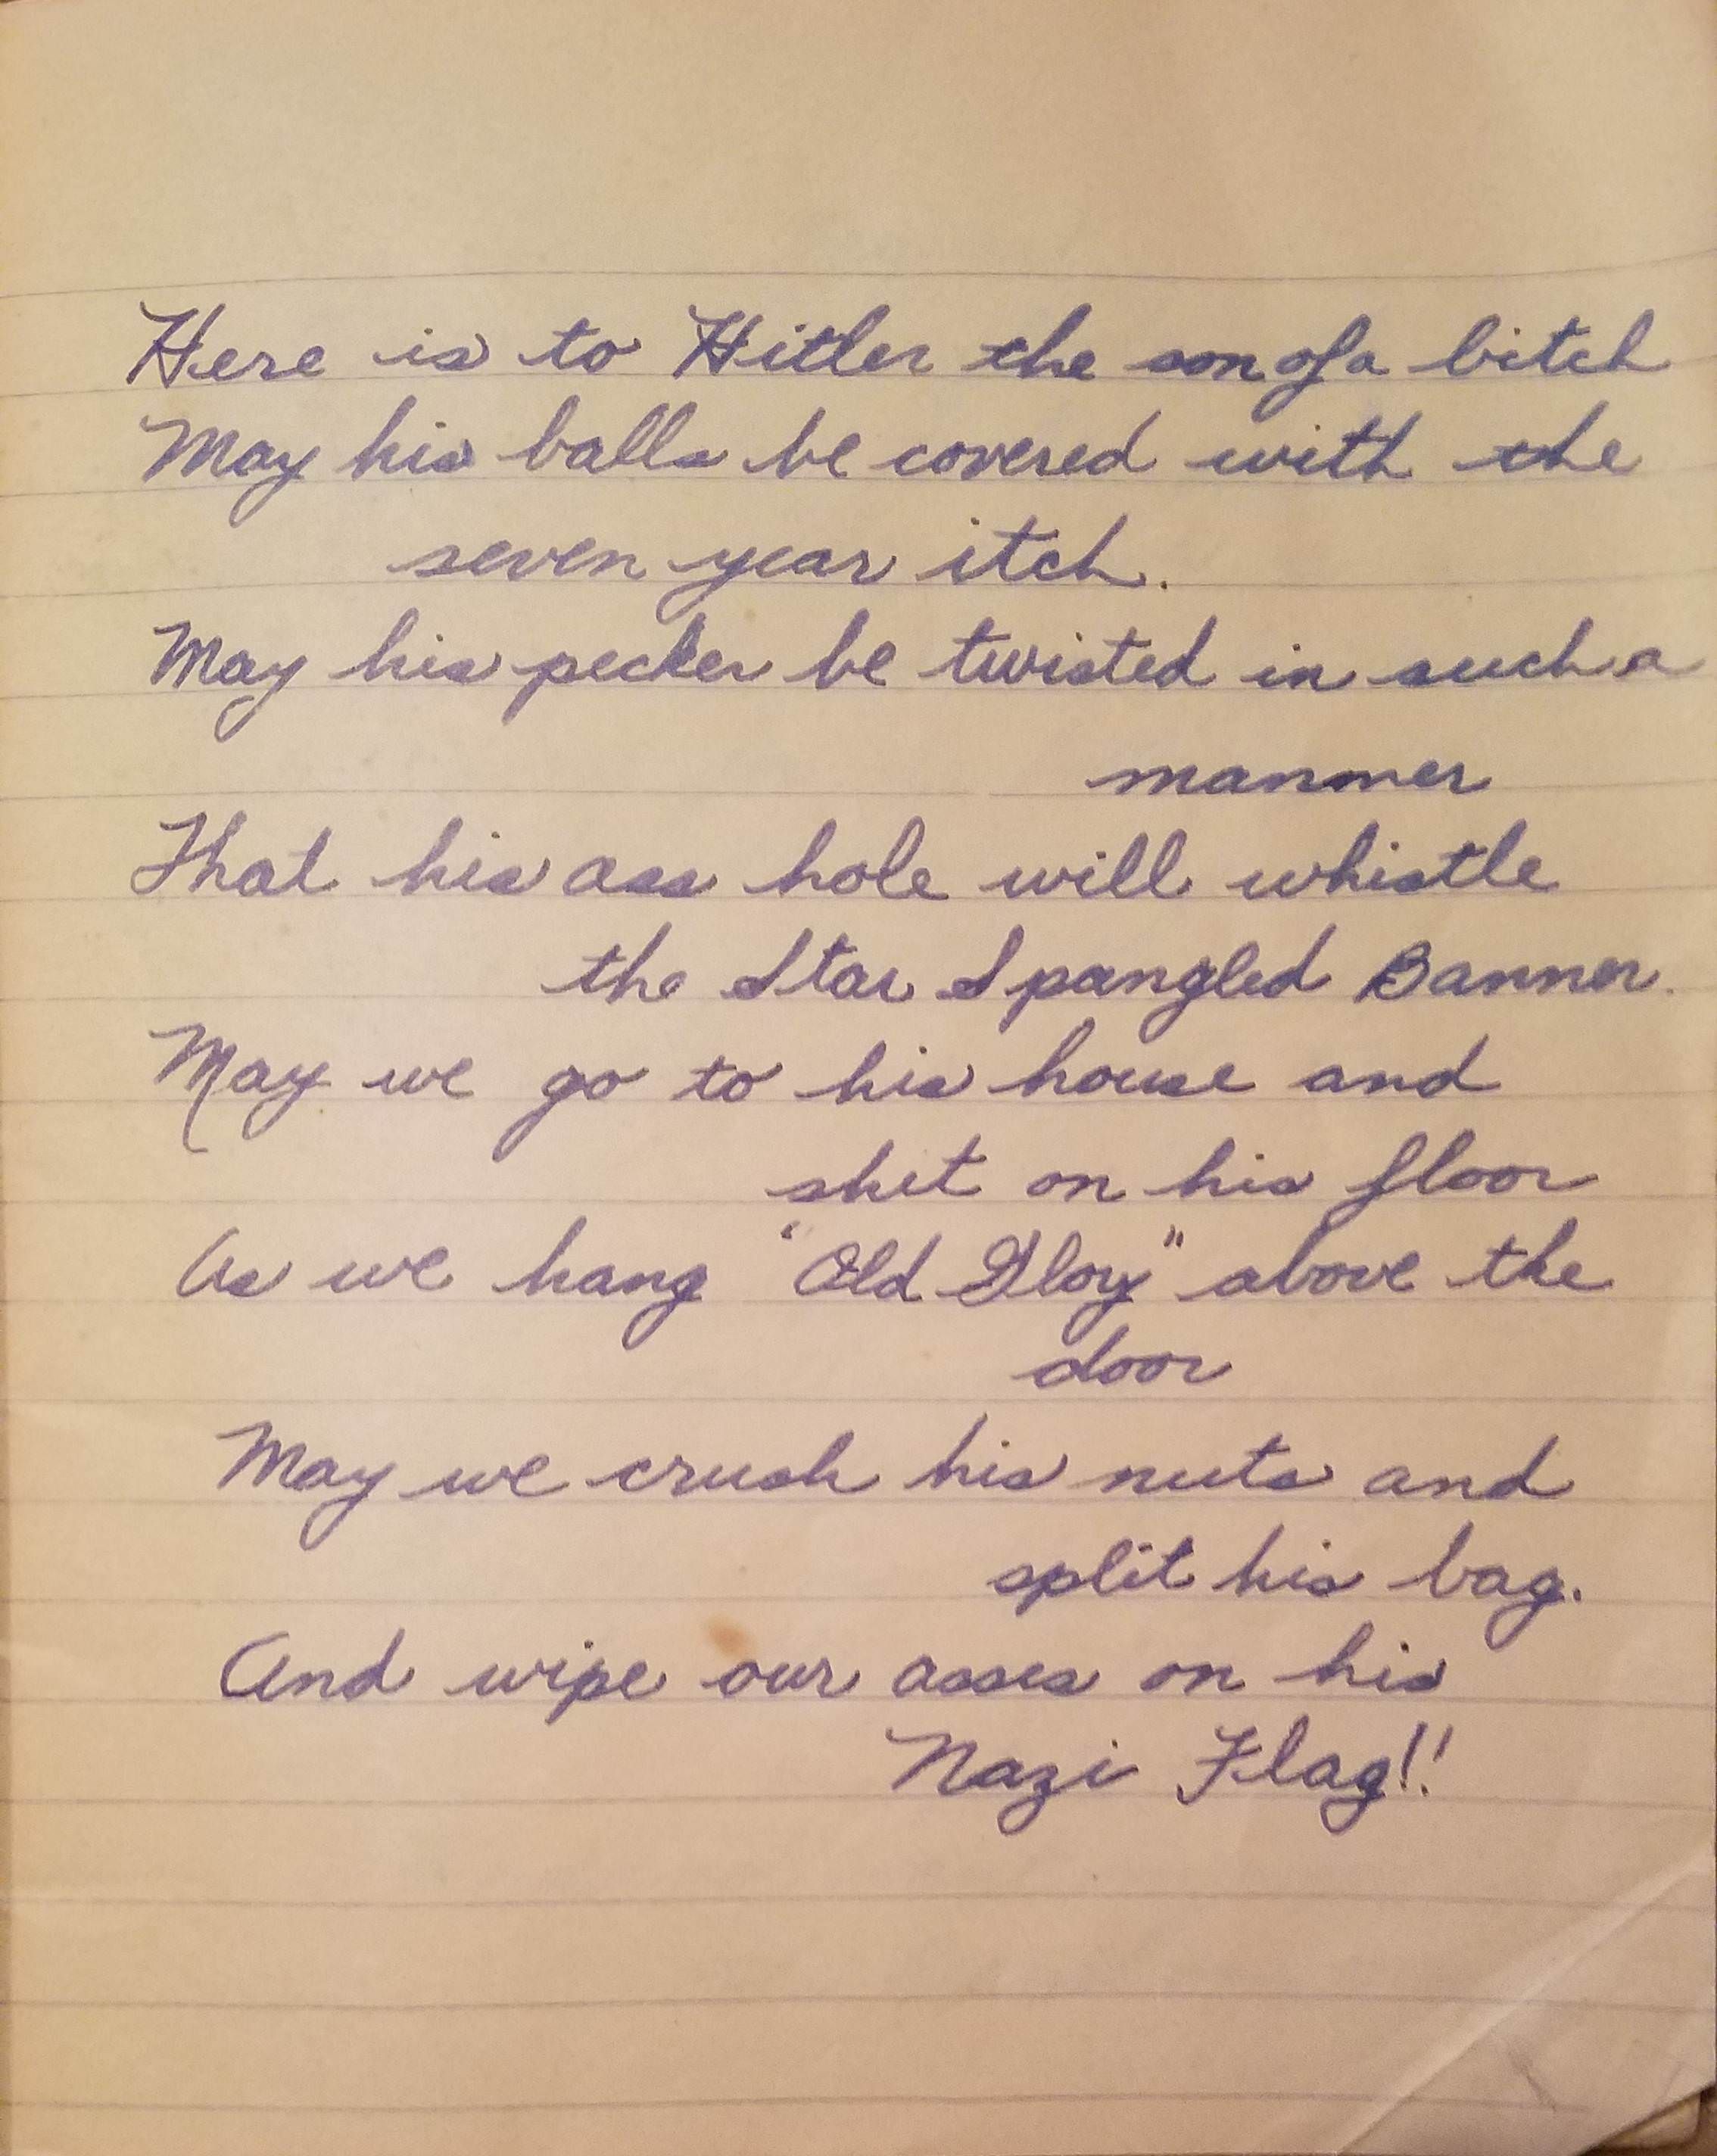 Was going through my great-grandmother-in-law's things and found this gem in her husband's journal: